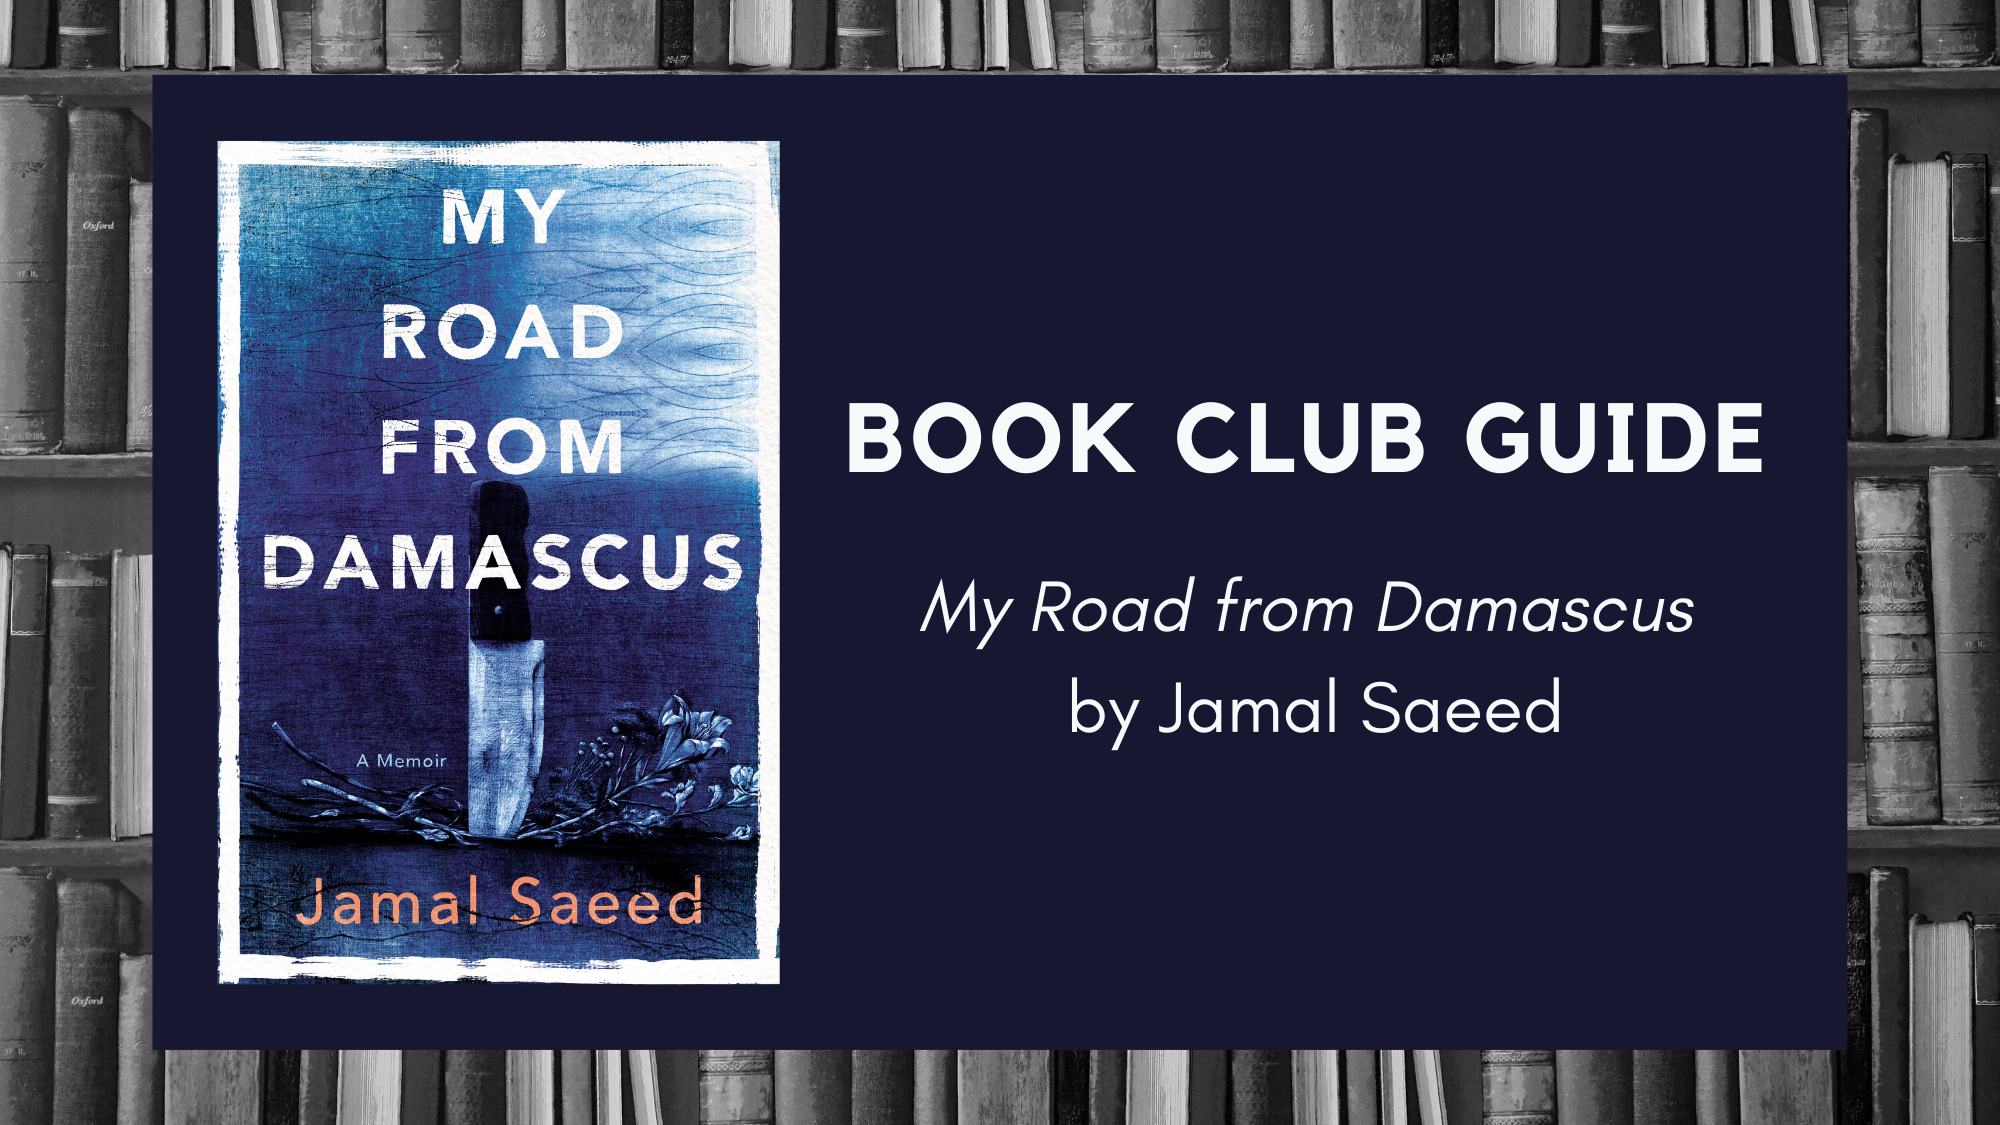 Book Club Guide: My Road from Damascus by Jamal Saeed